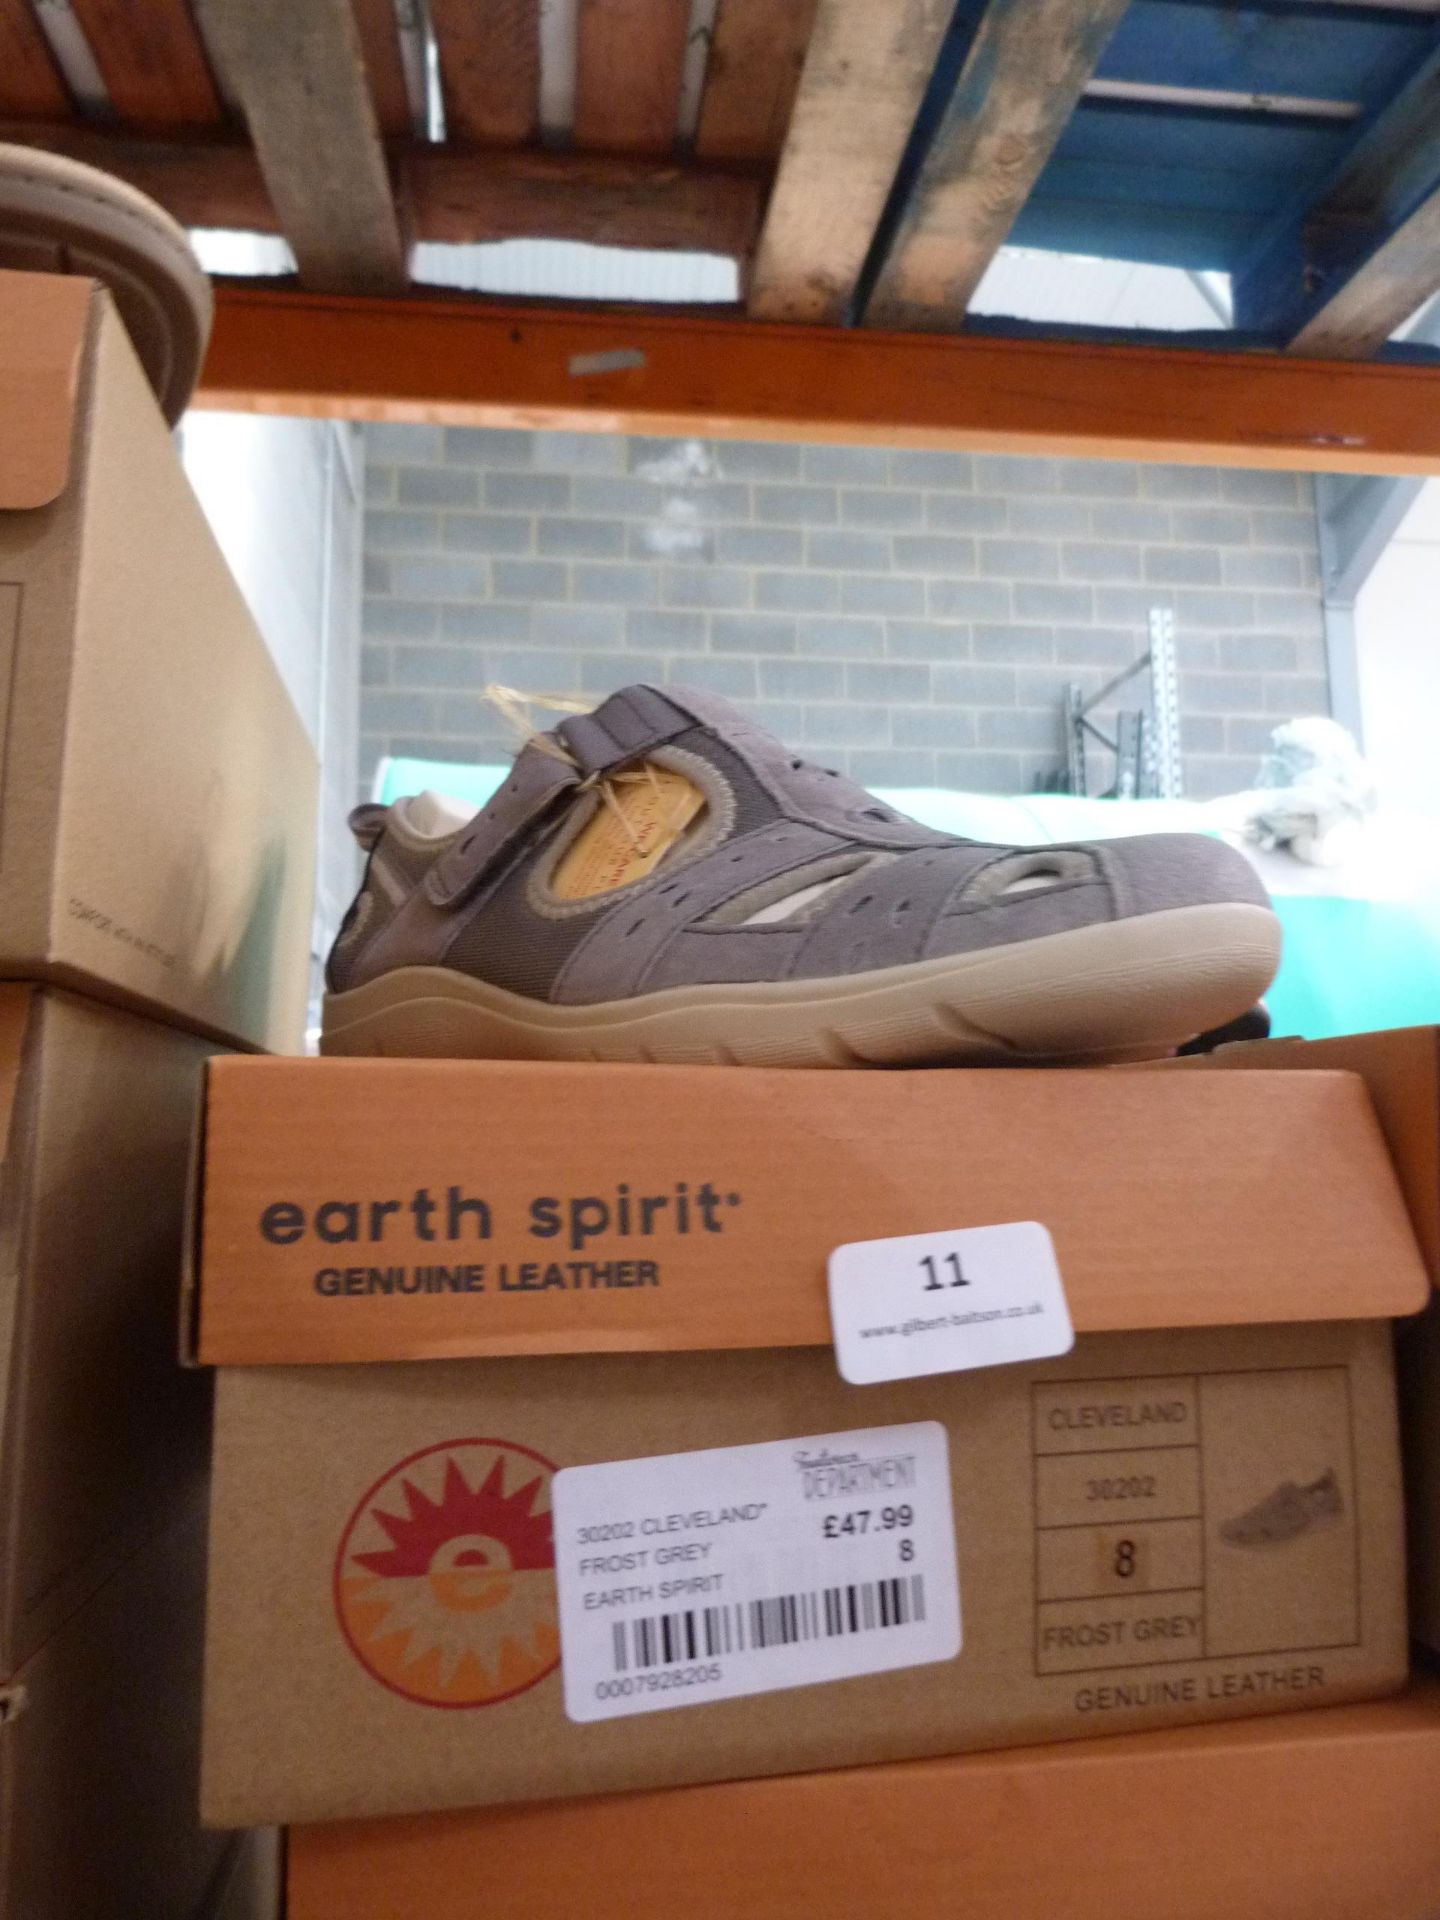 *Earth Spirit Genuine Leather Cleveland Shoes (fro